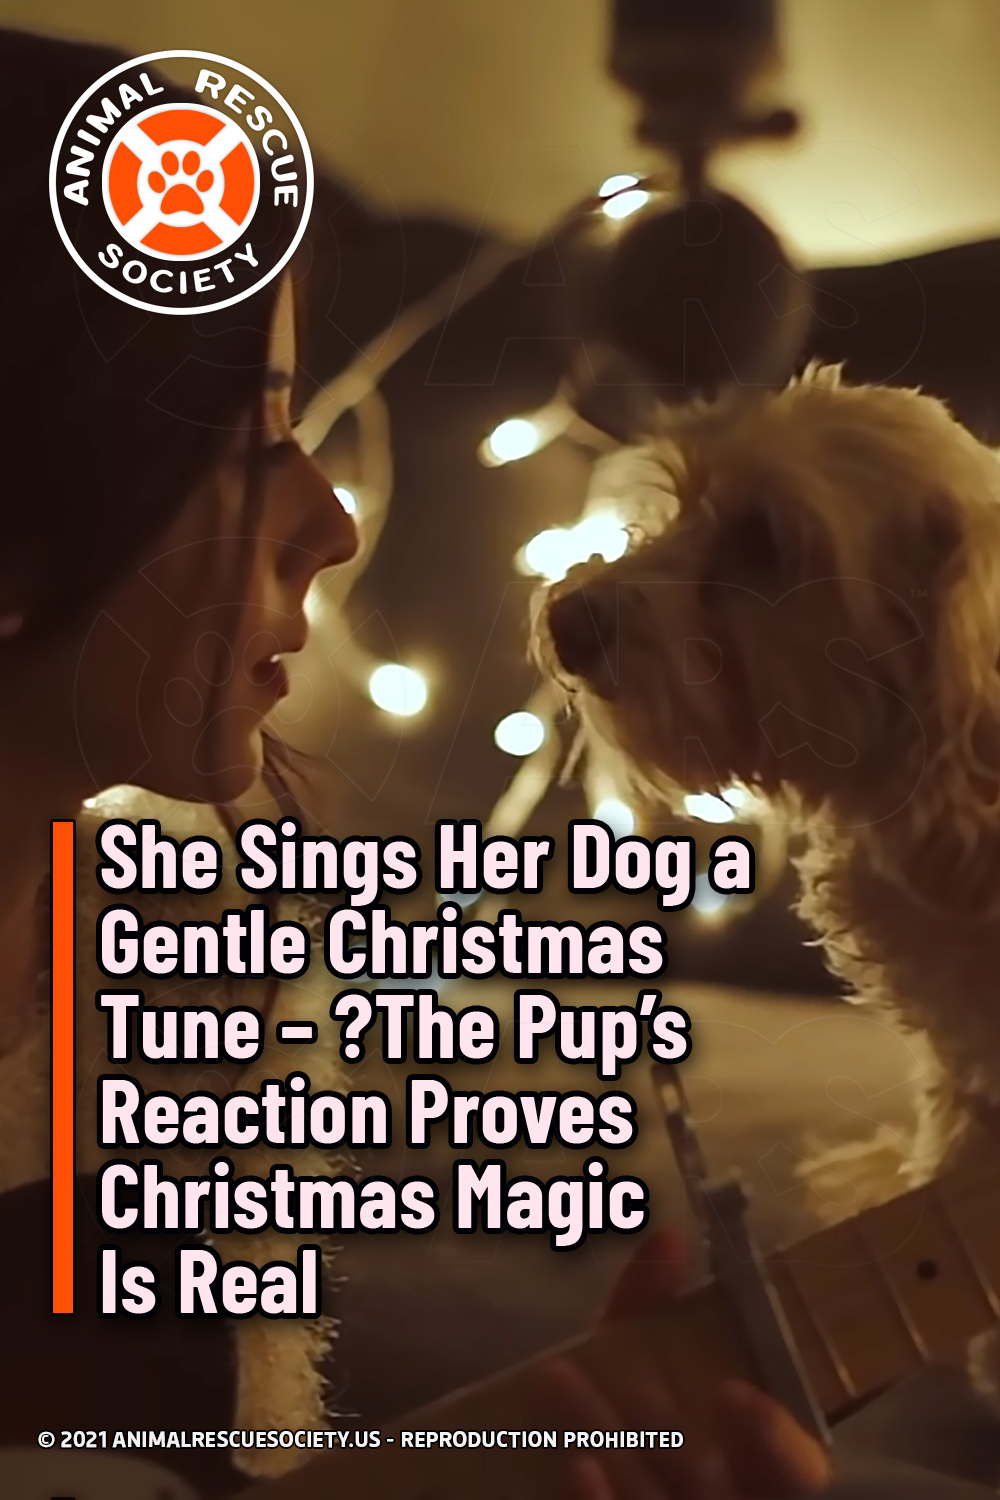 She Sings Her Dog a Gentle Christmas Tune – ?The Pup’s Reaction Proves Christmas Magic Is Real